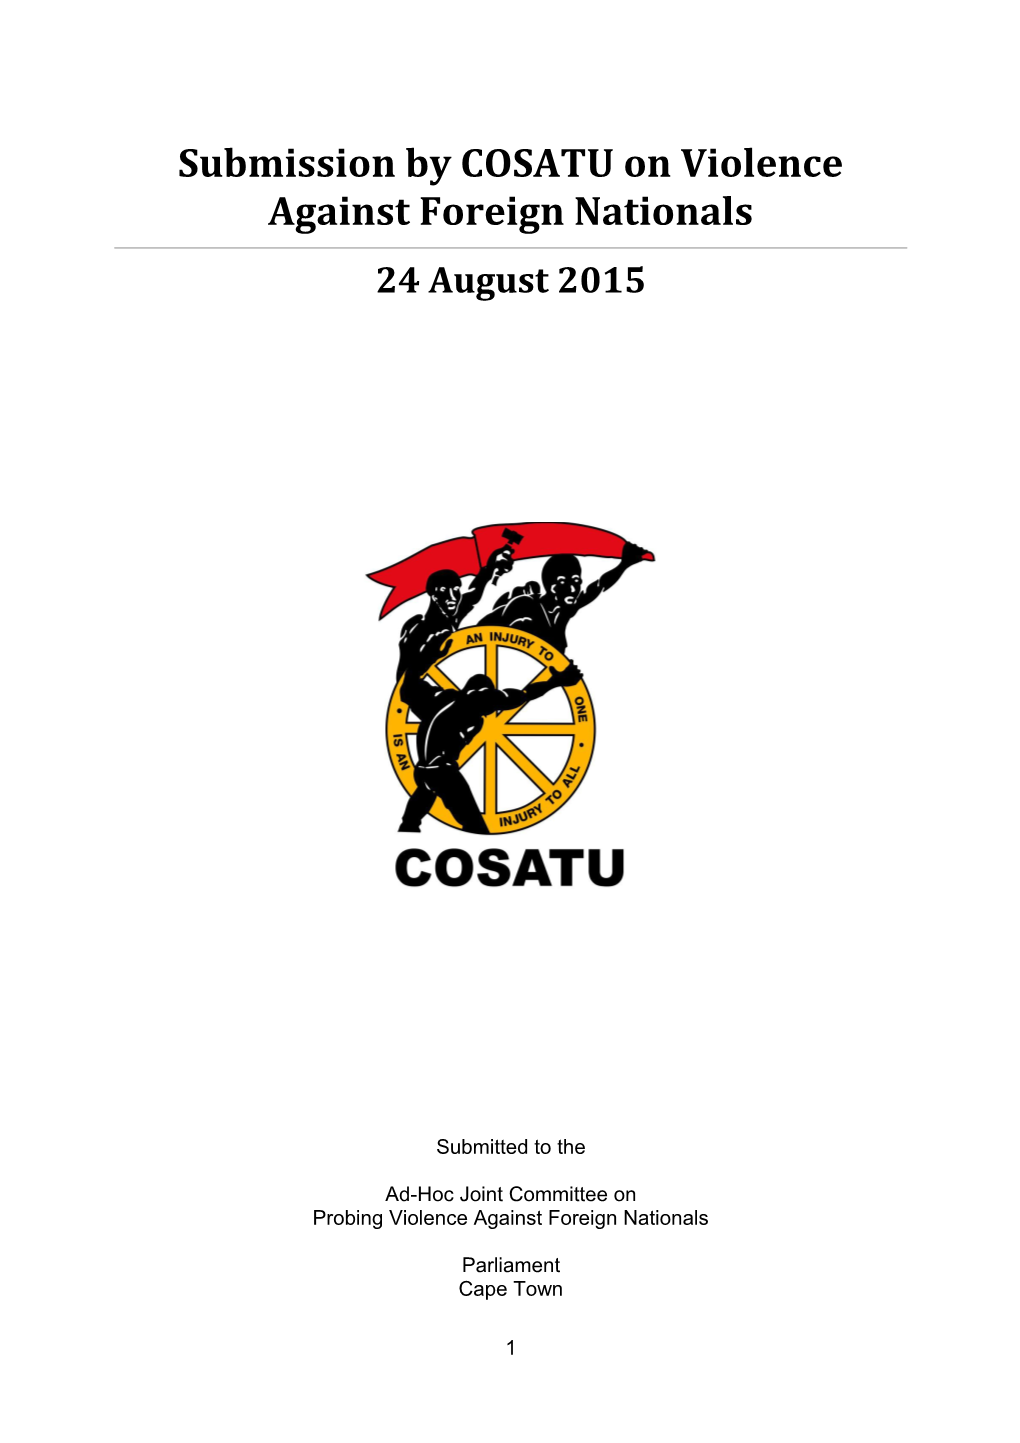 Submission by COSATU on Violence Against Foreign Nationals